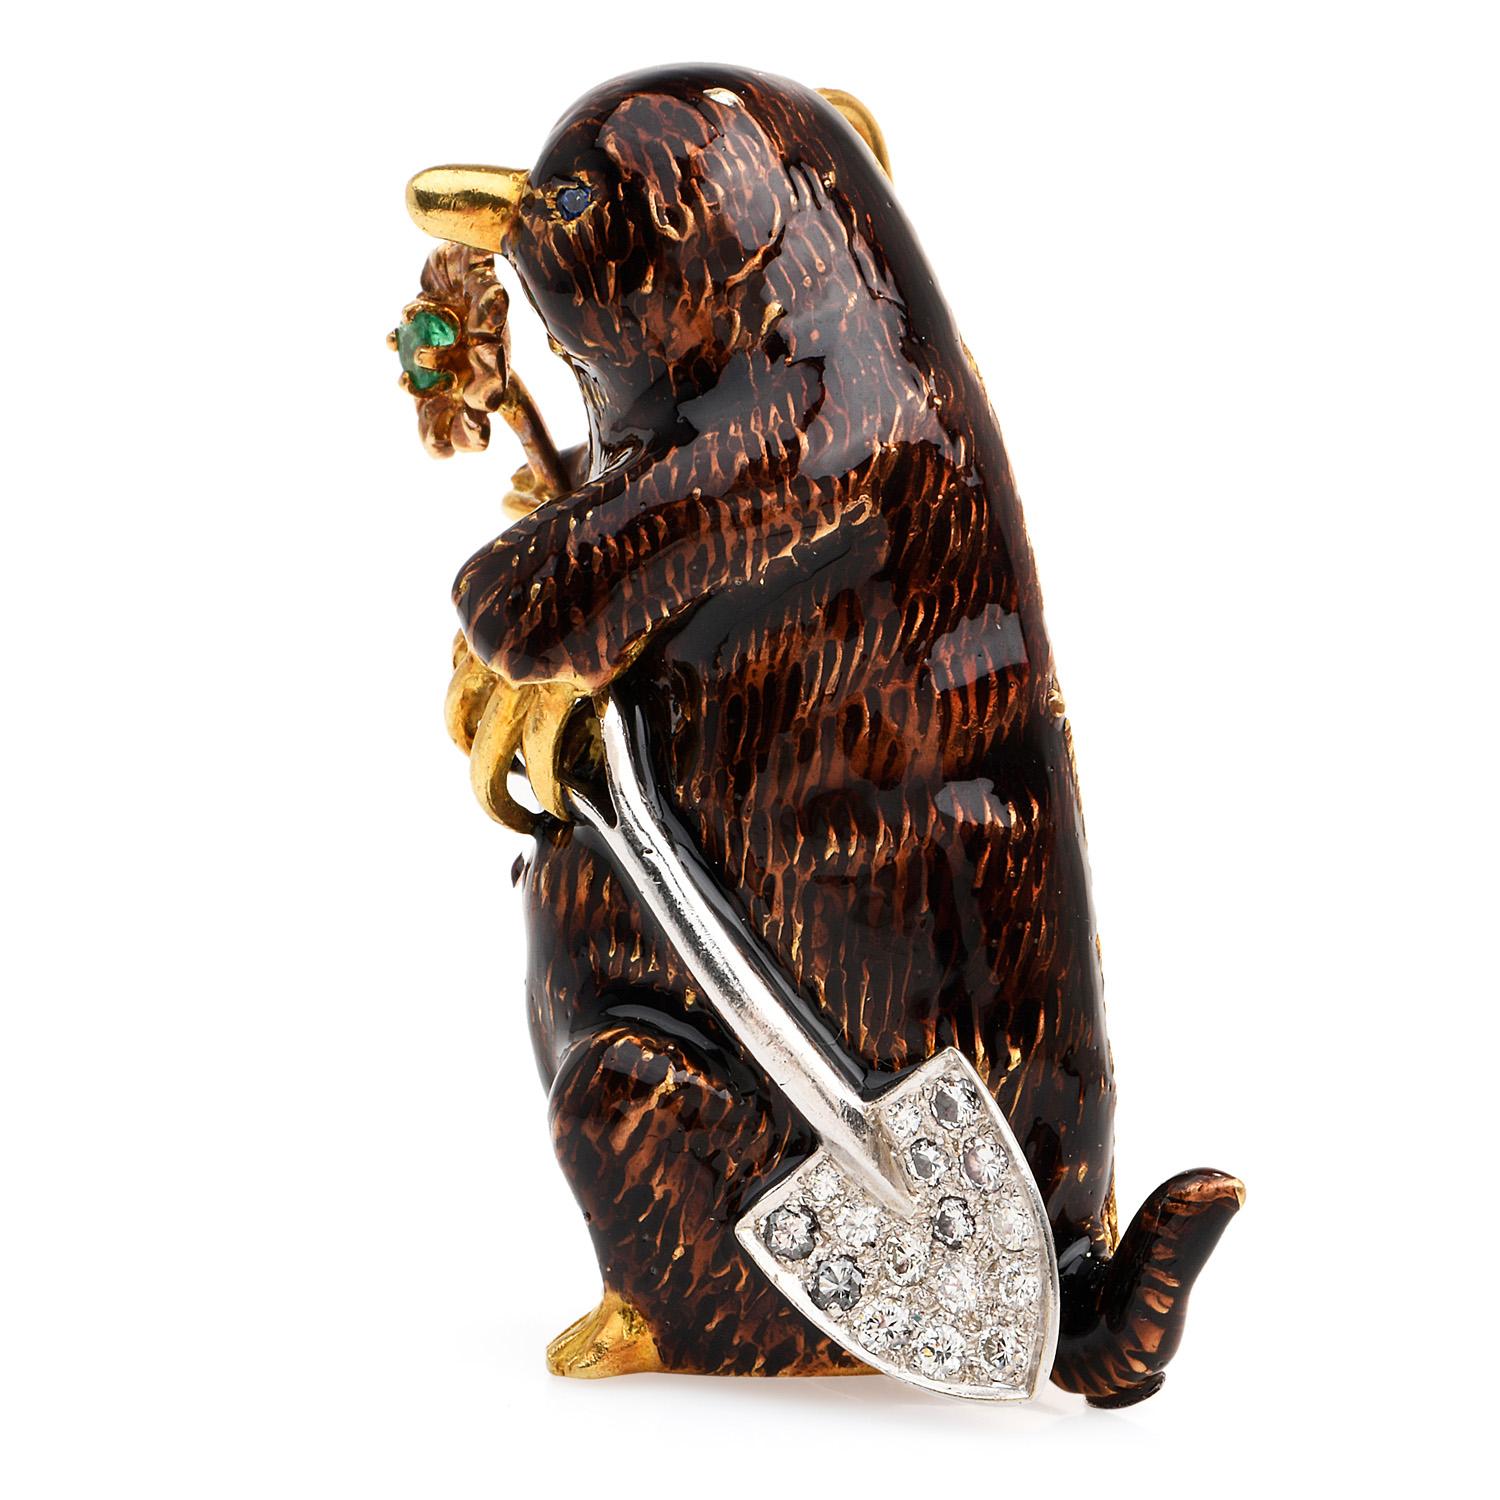 This Designer piece has Brown Enamel accents, inspired on the Mole, Echidna Animal motif with a sparkly Shovel, is an exquisite peculiar pendant,

Crafted in solid 18K Yellow & White Gold, the eye is composed by (1) round-cut, prong-set, blue